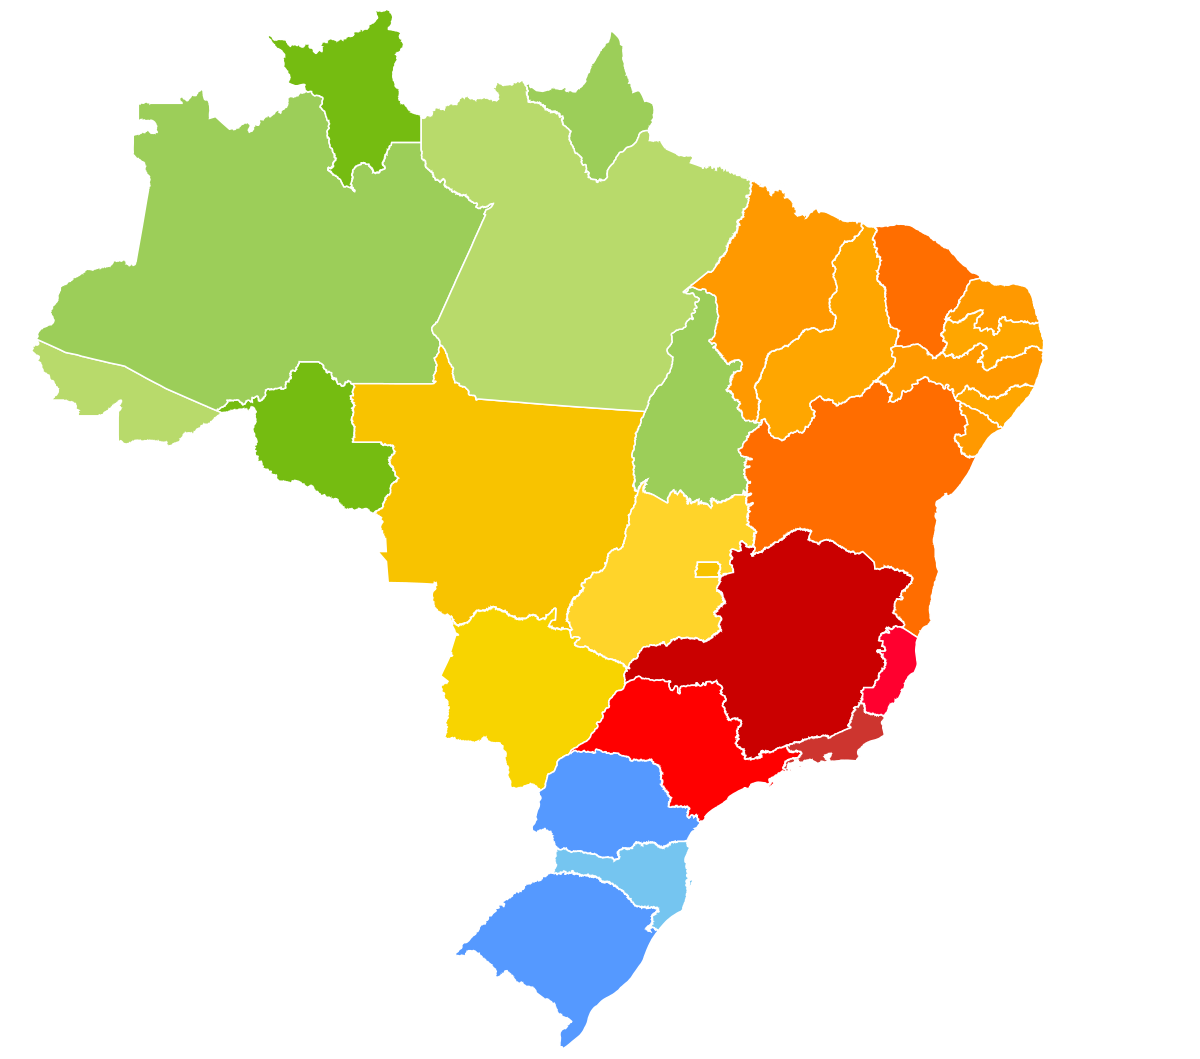 State capitals, Federal District, and macro-regions of Brazil. The